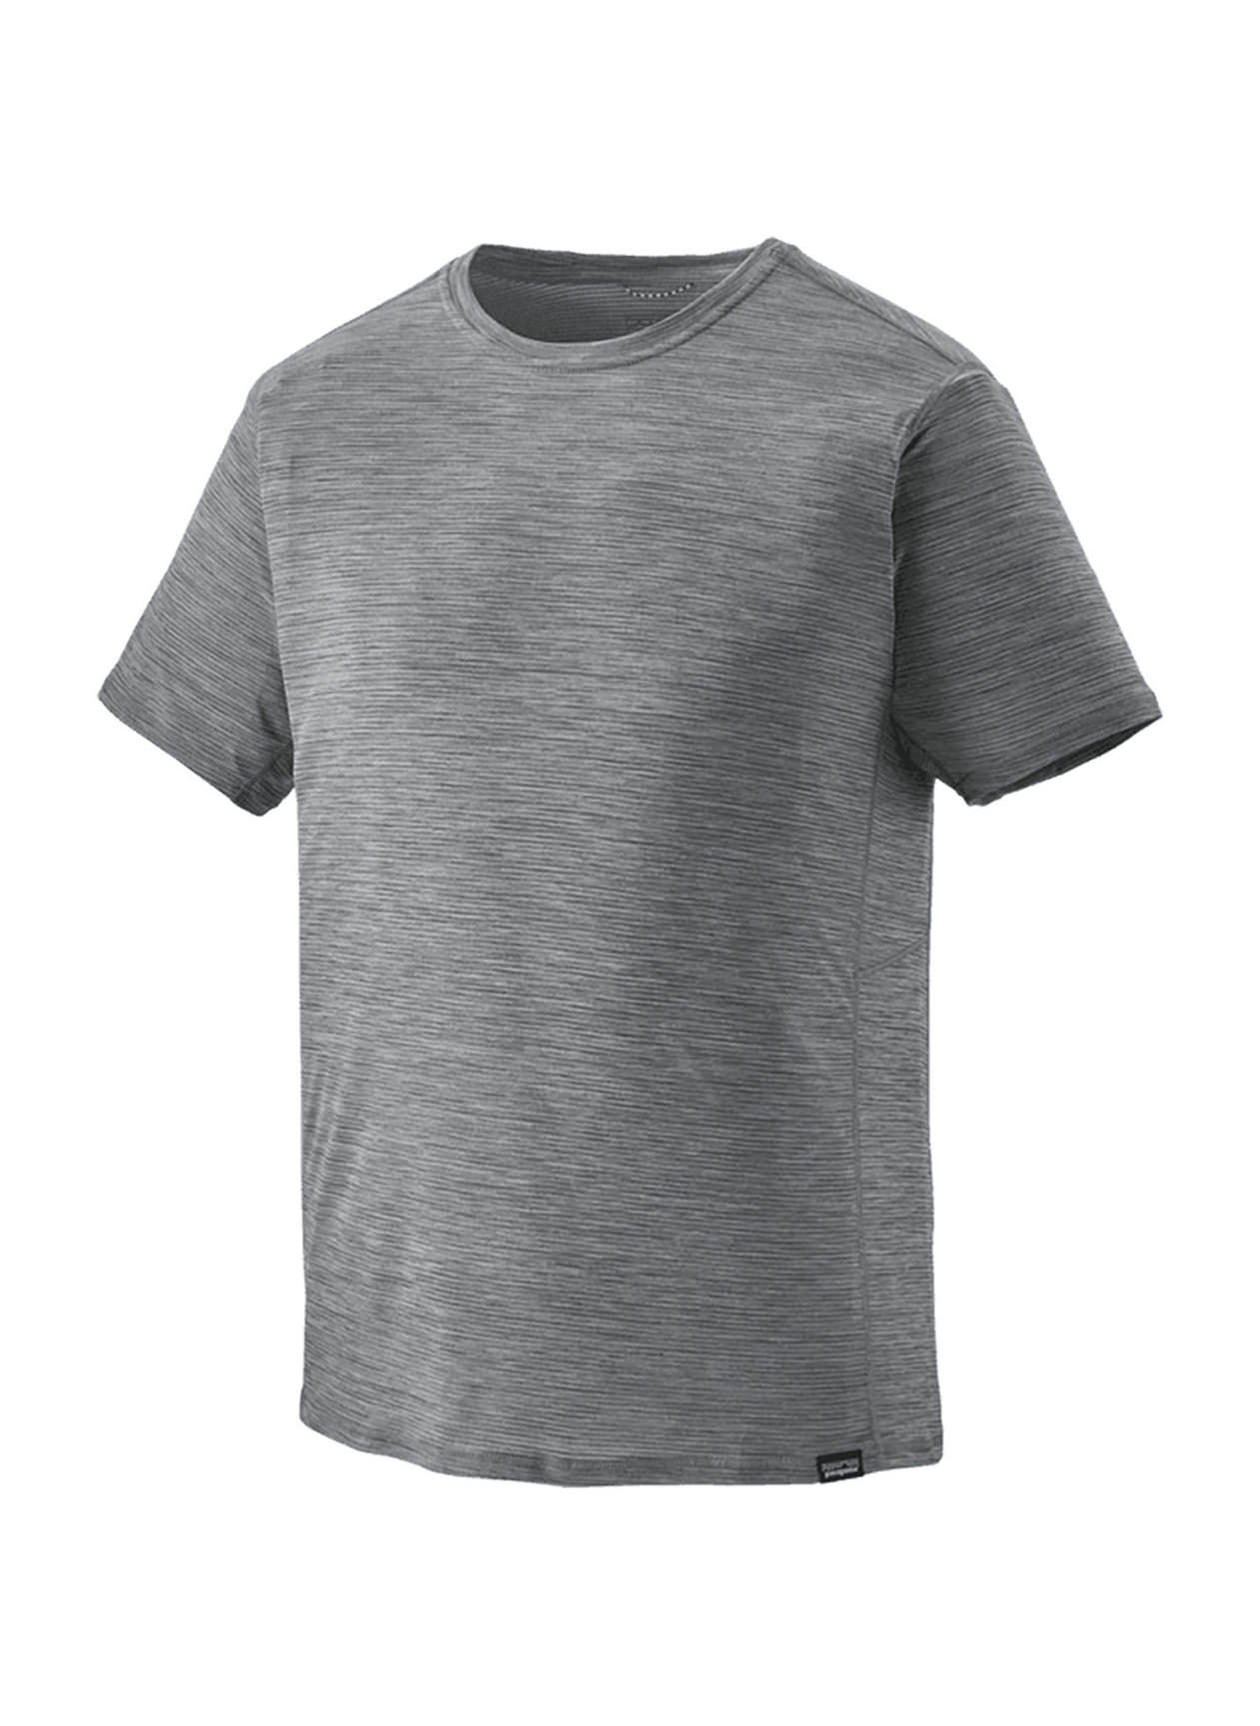 Patagonia Men's Forge Grey / Feather Grey Capilene Cool Lightweight T-Shirt